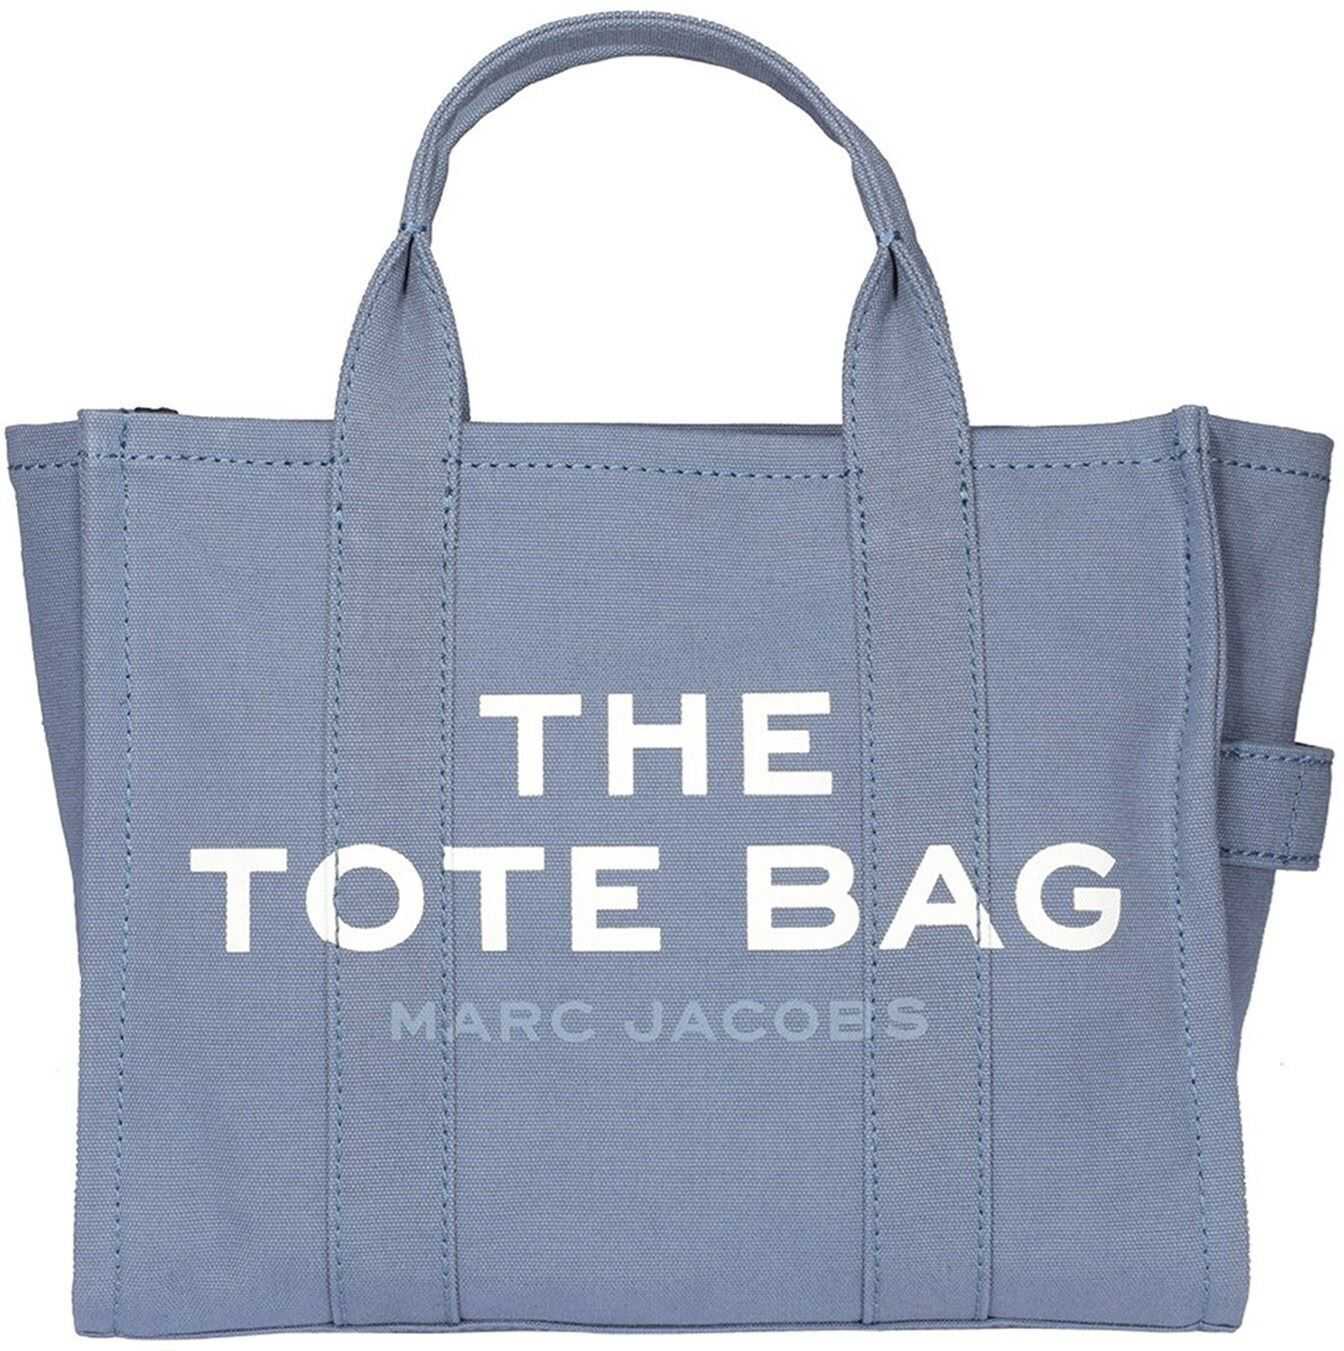 Marc Jacobs The Traveler Small Tote Bag In Light Blue M0016161 481 Light Blue